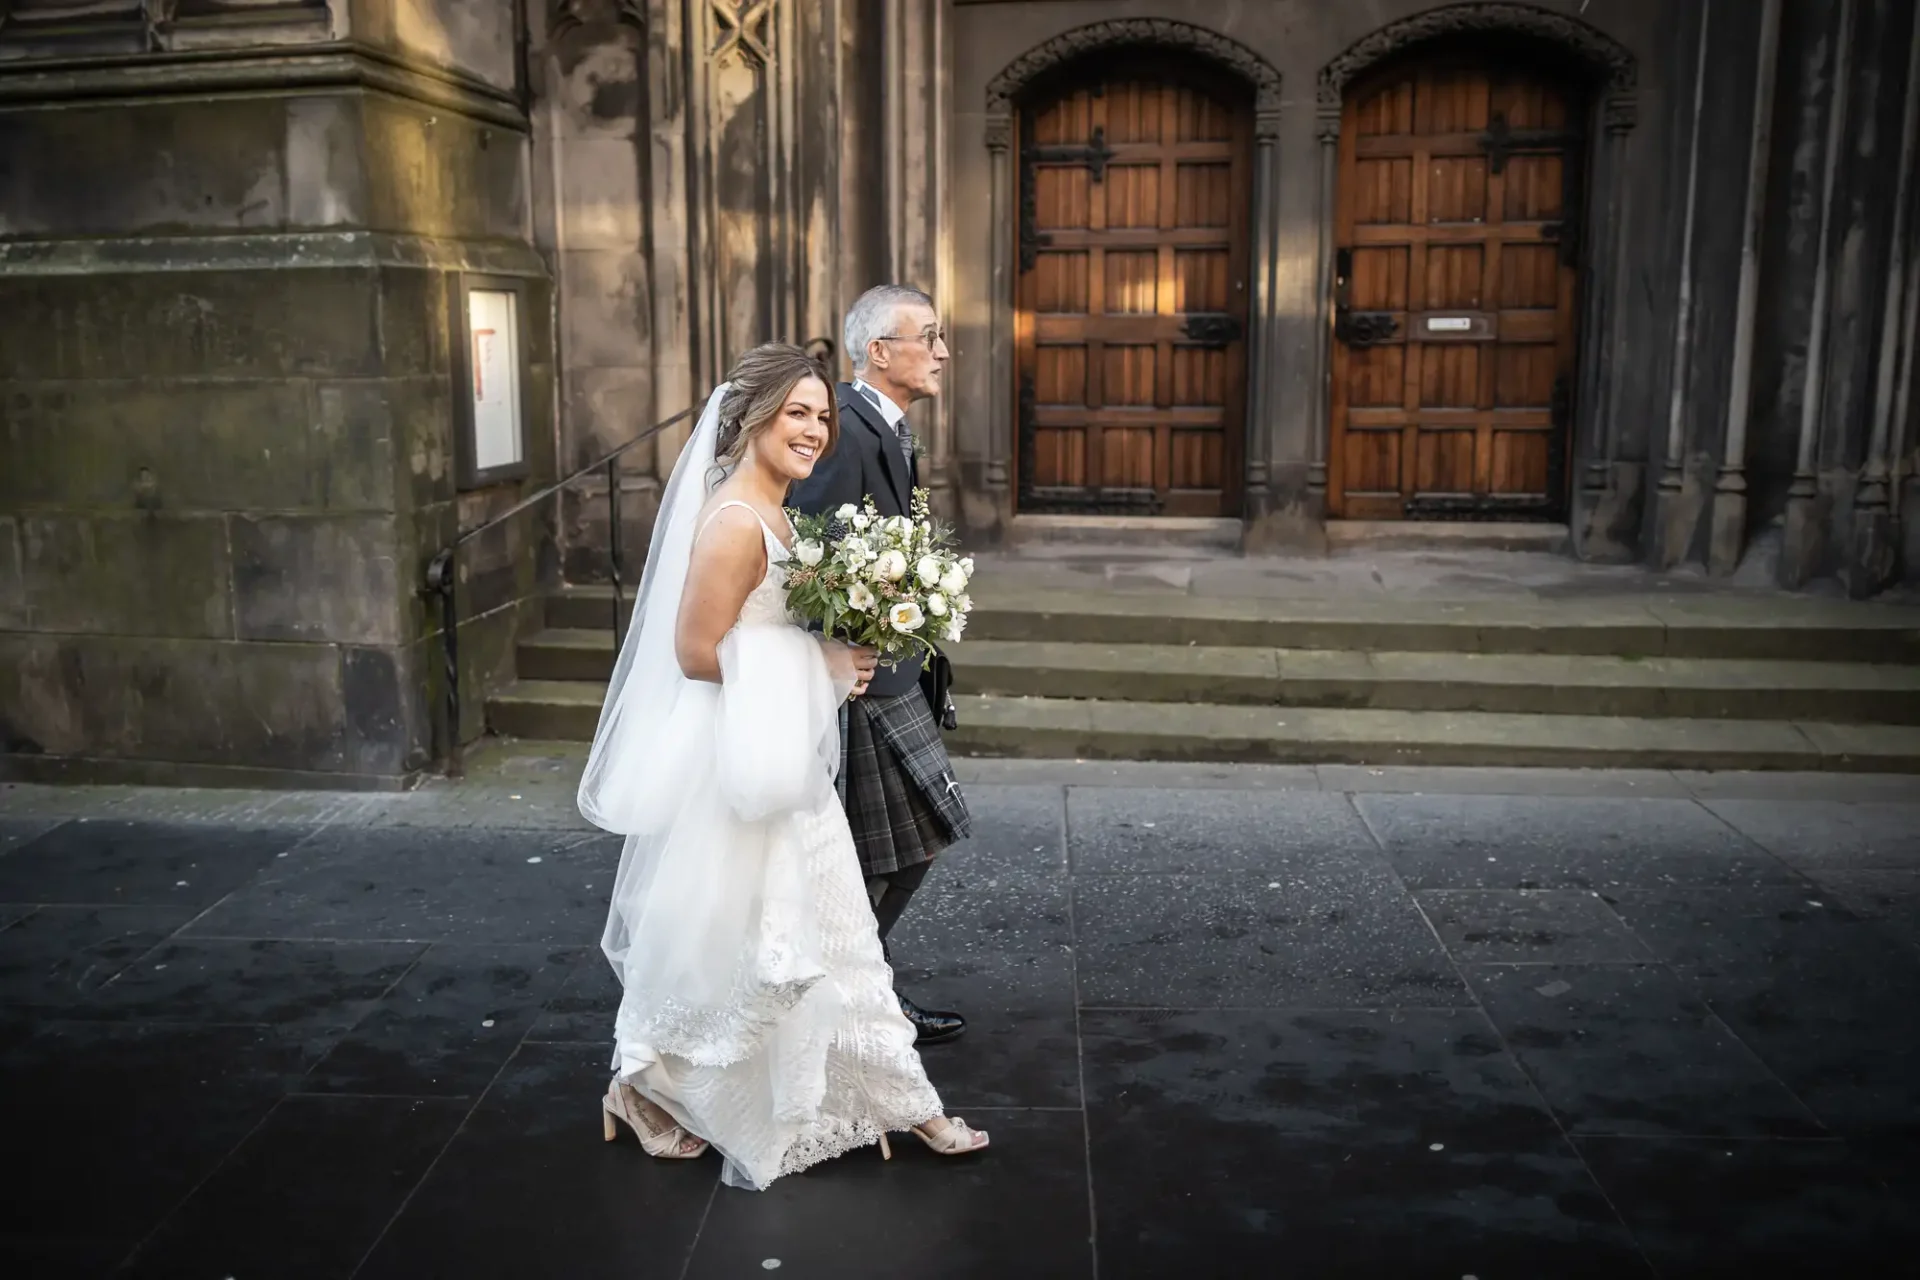 Bride in a white dress walking with an older man in a kilt outside a church with large wooden doors.